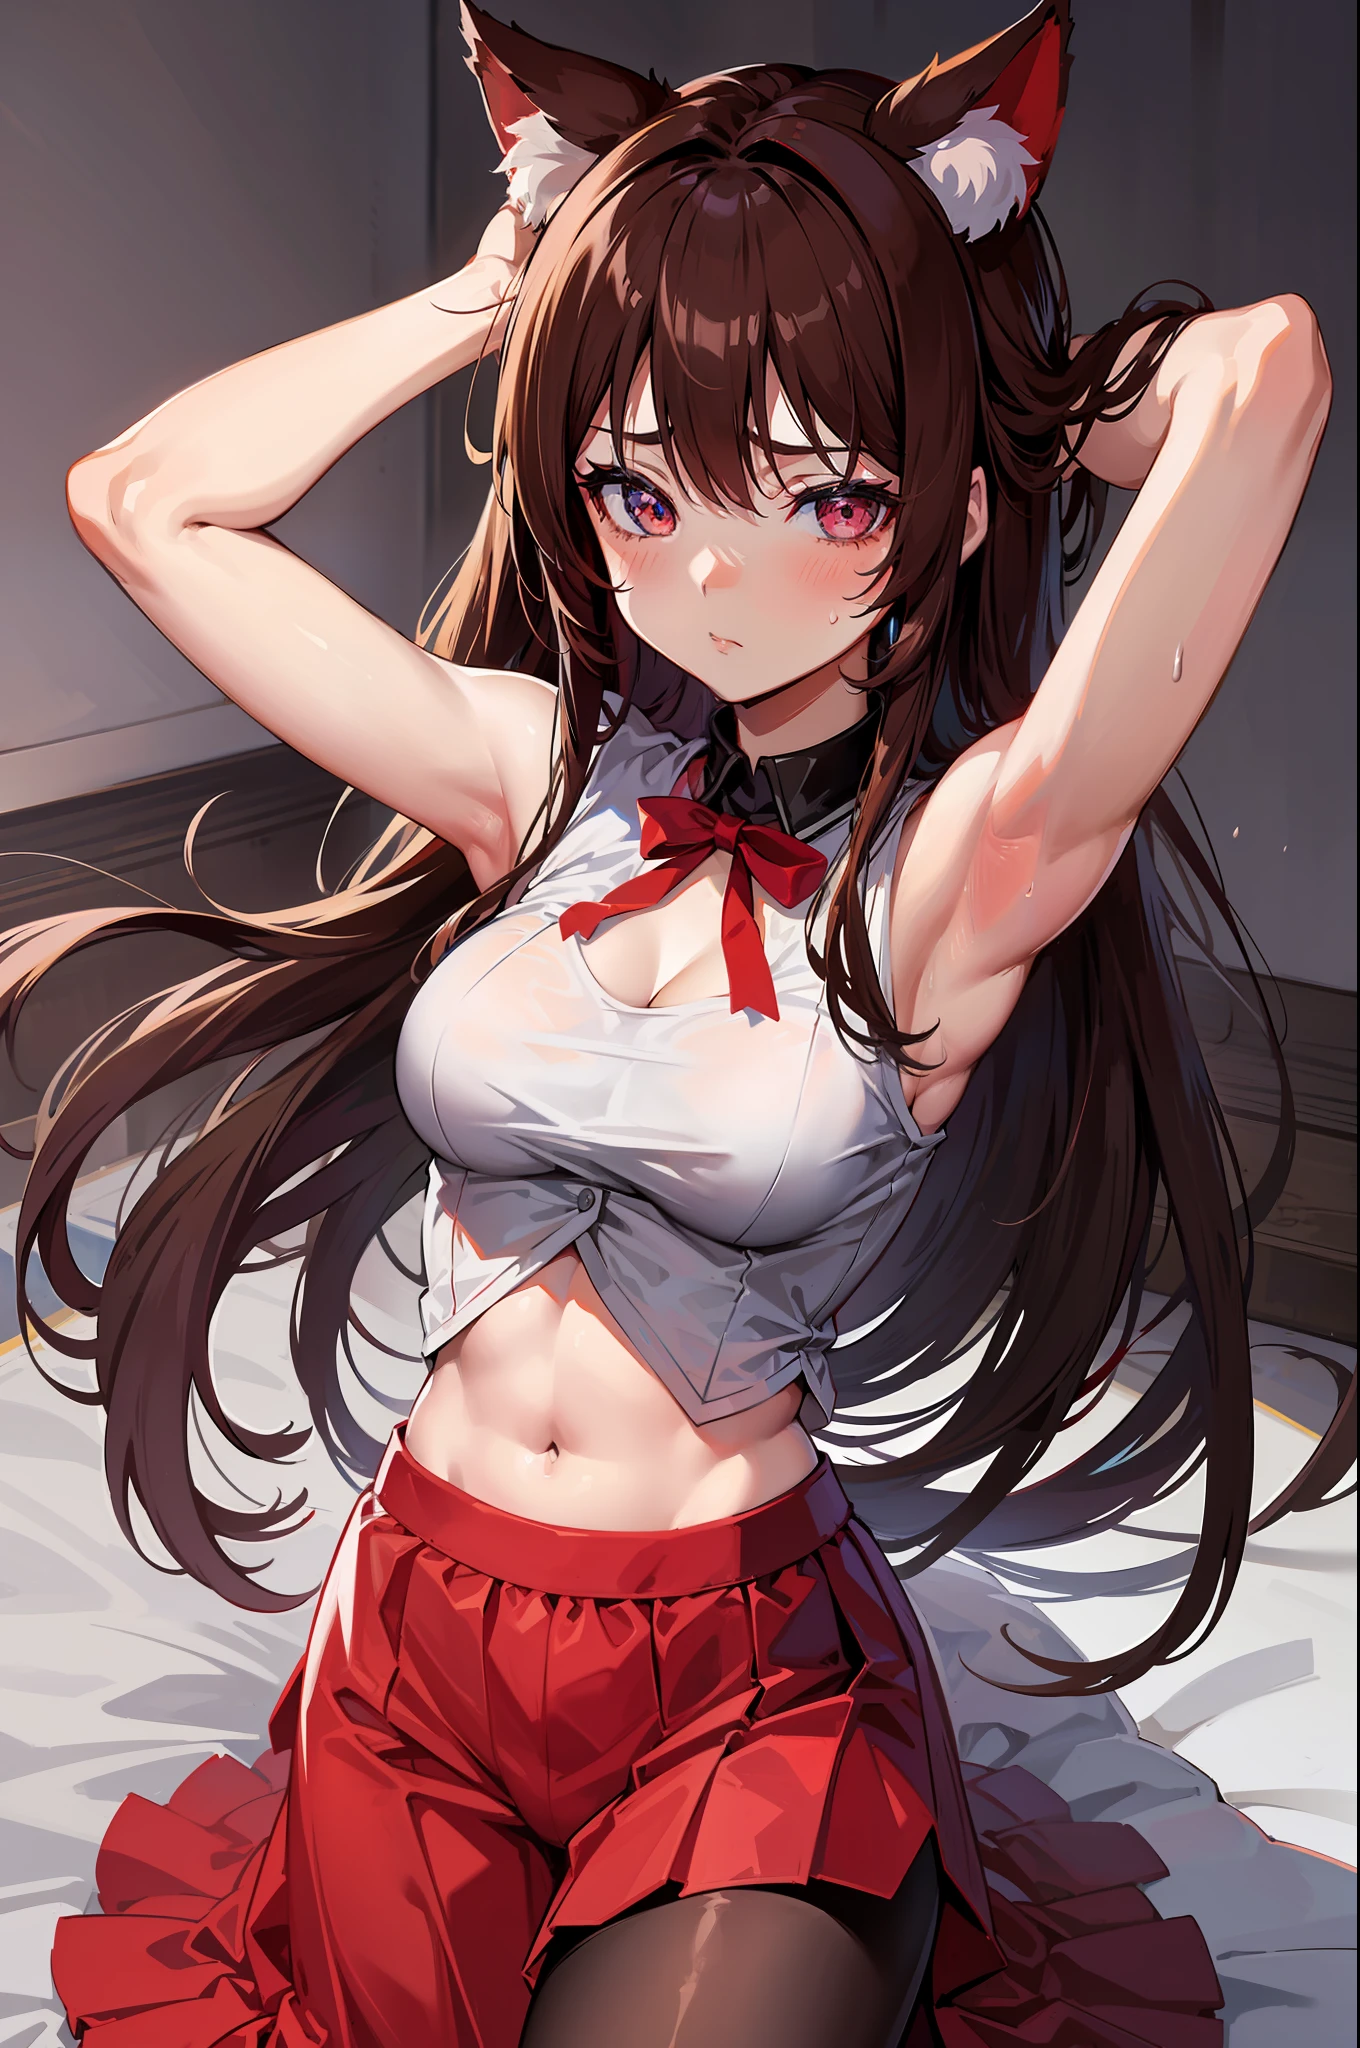 Top quality, 8K)) anime girl with long hair and cat ears, Rin Tosaka, anime moe art style, anime style like Fate/stay night, anime girl with long hair, very cute anime girl face, nightcore, from girl frontline, cute anime girl portrait, anime girl with cat ears, high quality anime art style, Beautiful anime woman red ribbon in hair gorgeous red dress beautiful abs sweat armpit sweat arm up angry